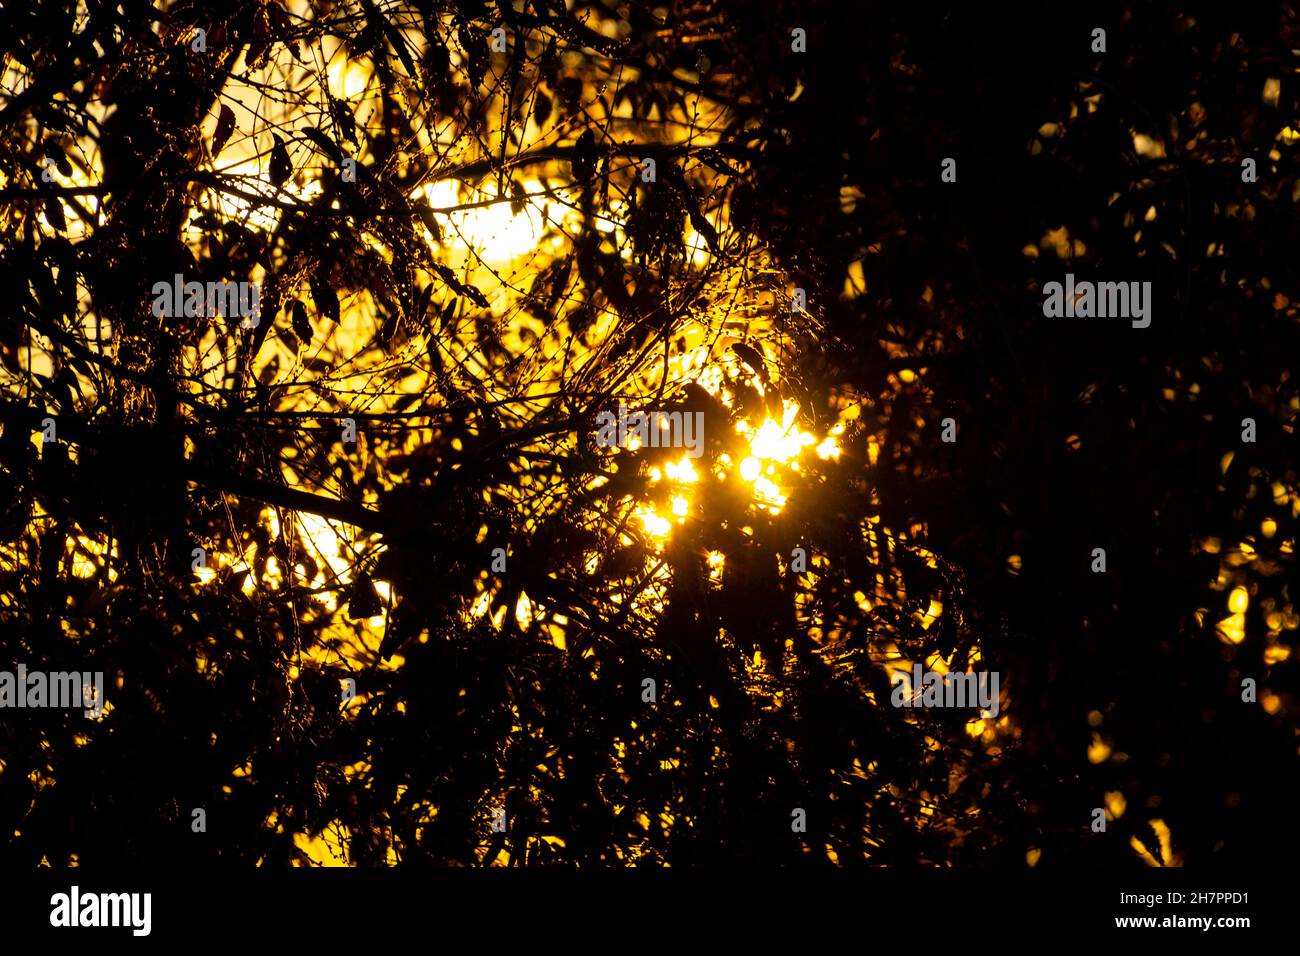 Colorful sunset with the sun half hidden behind the branches and leaves of the trees in Madrid, Spain. Europe. Photography. Stock Photo